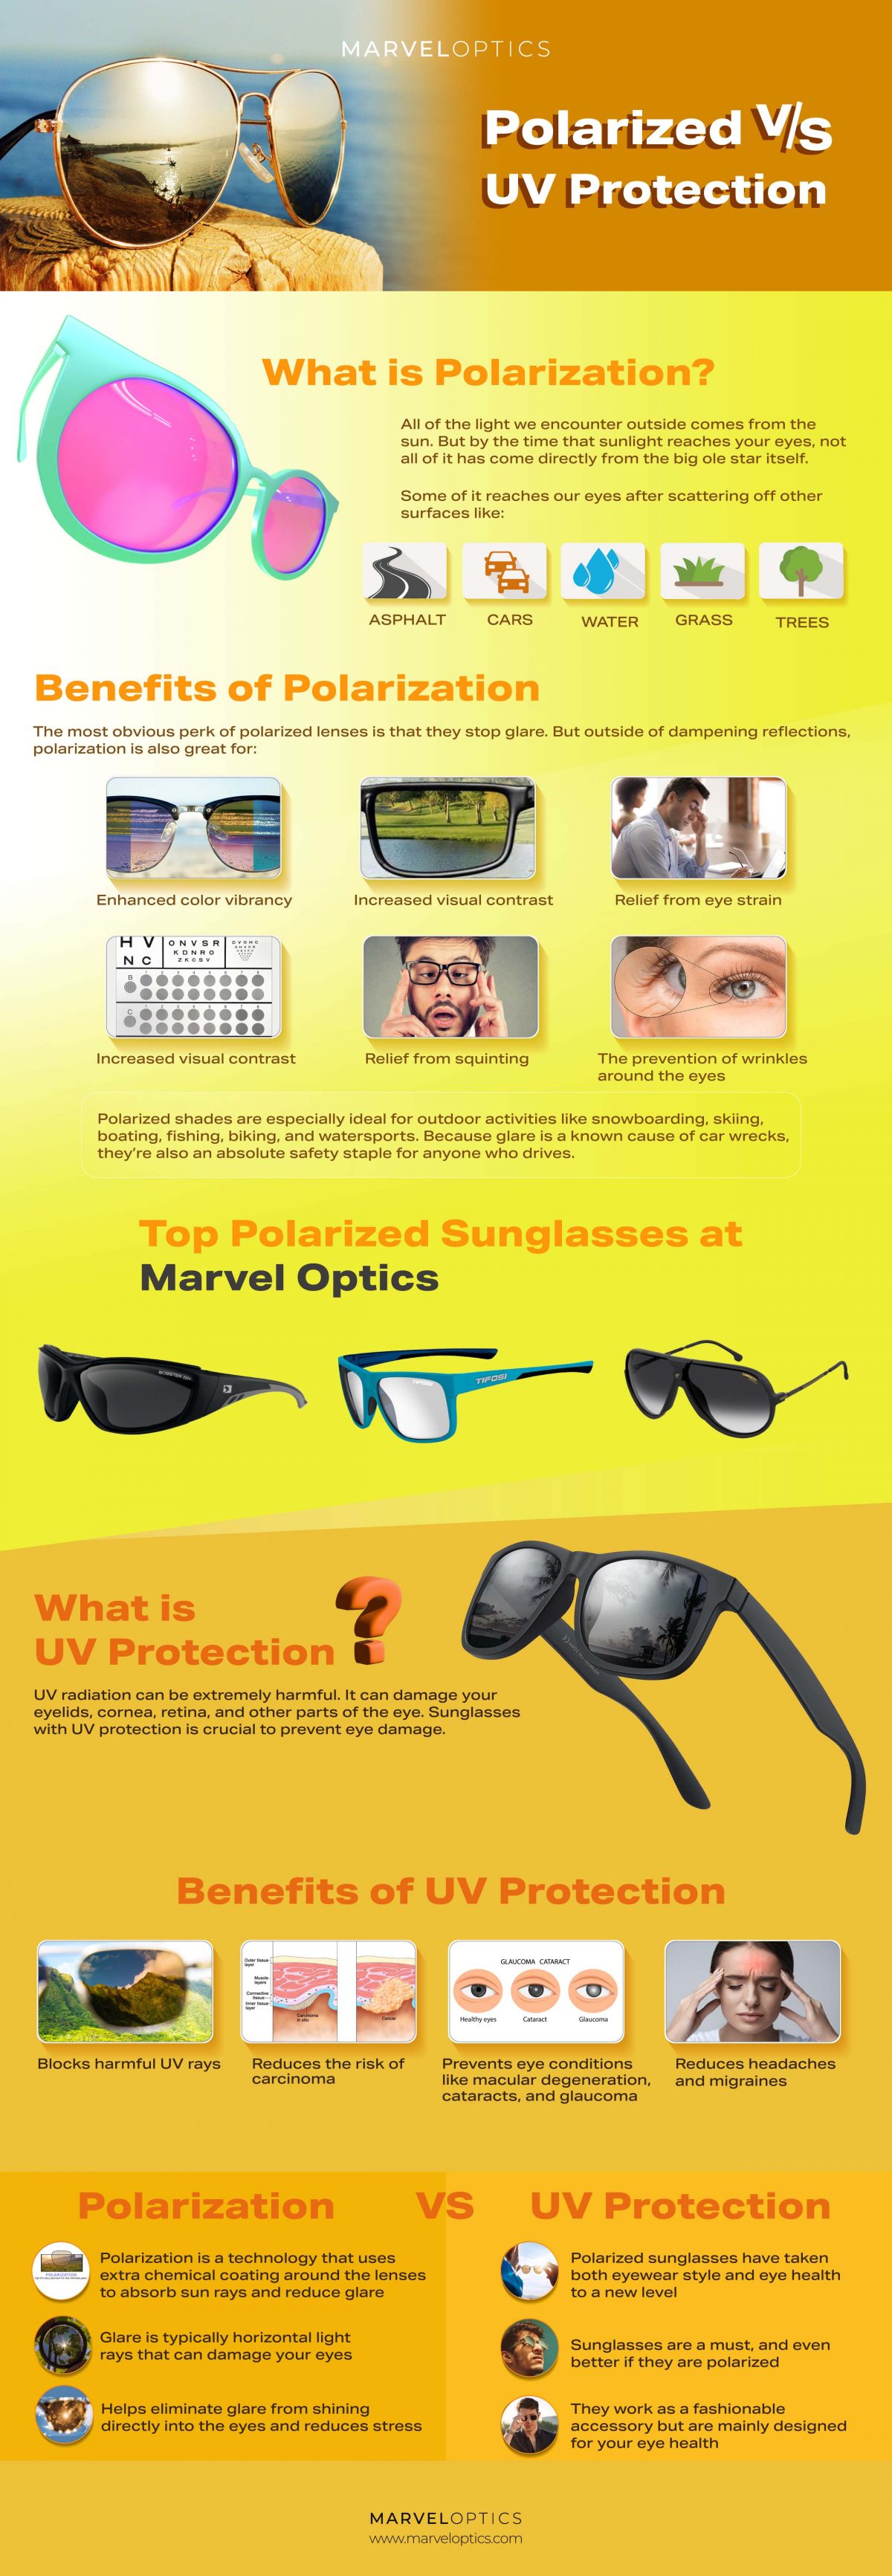 UV protection for sunglasses and glasses (UV400 Filter)